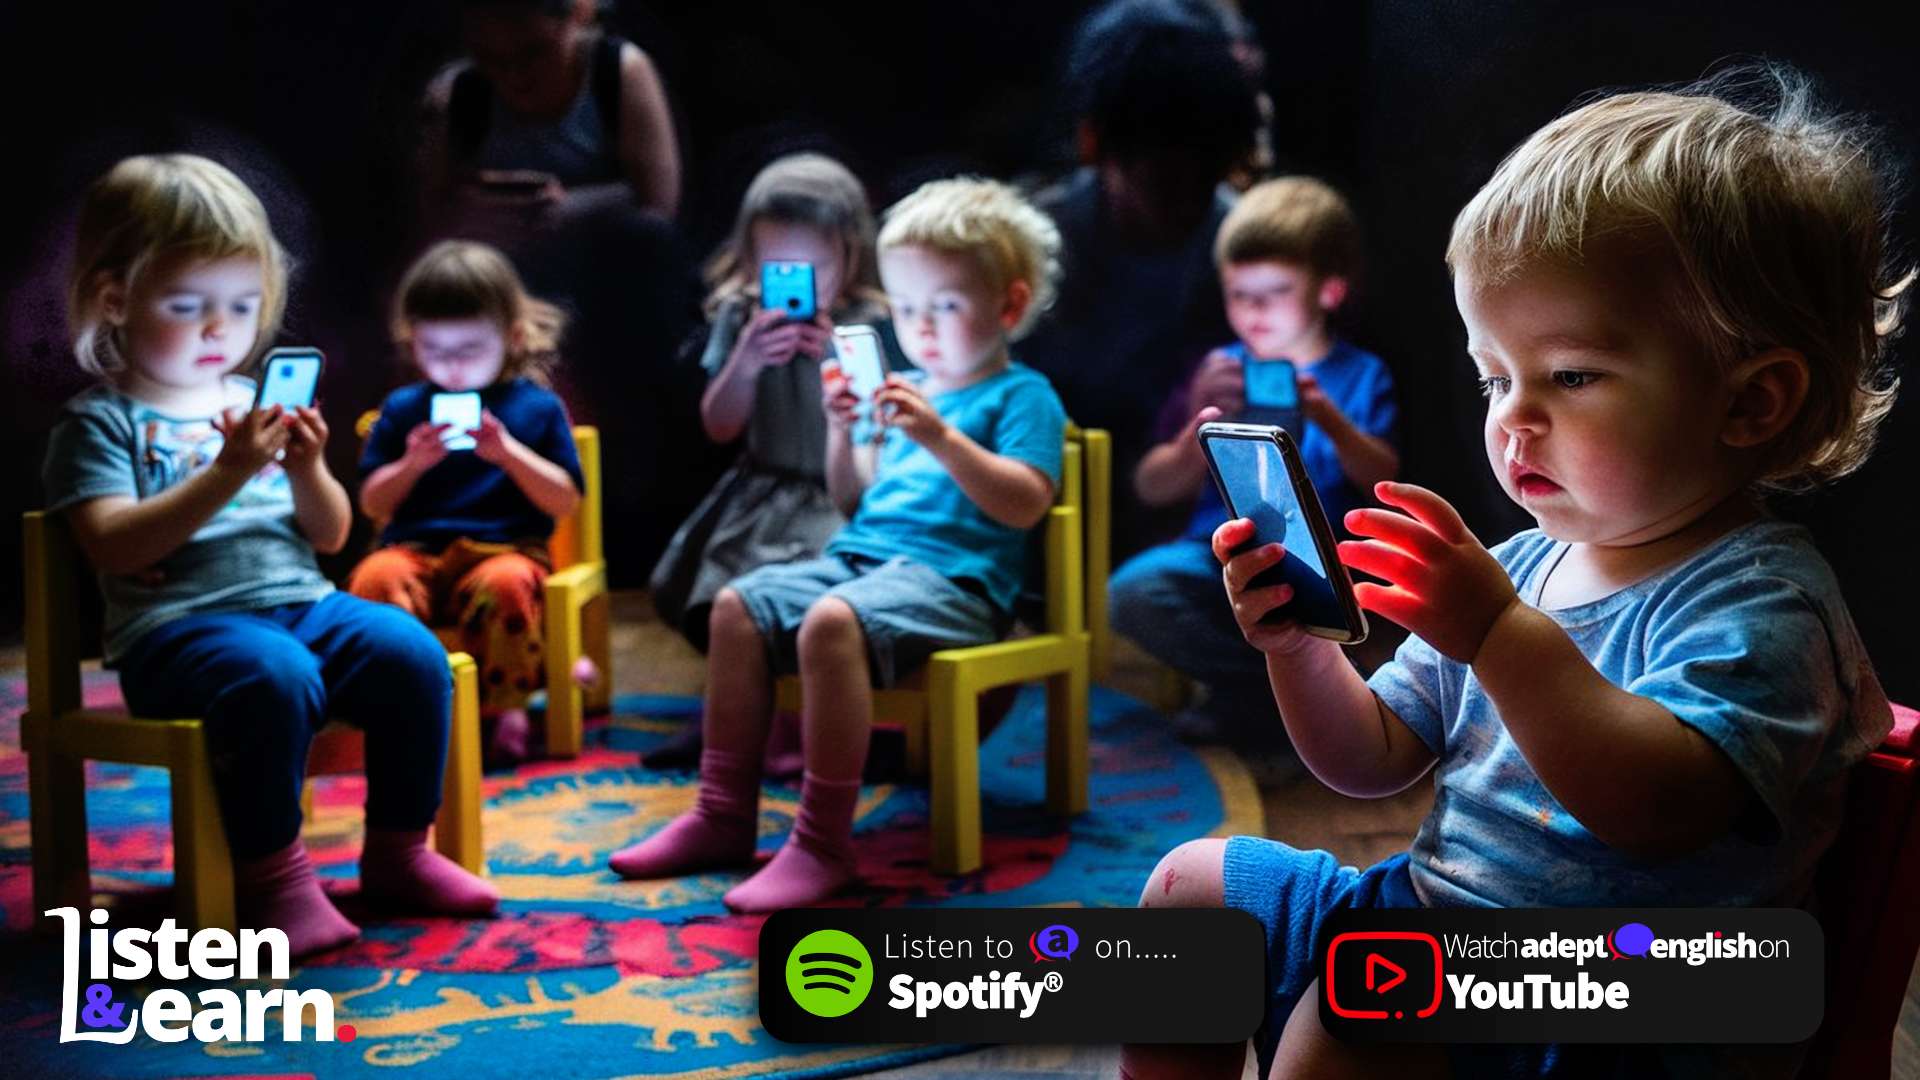 AI generated image of young children lit by the glow of the smartphones they are using. Improve your English with real-life topics you care about.